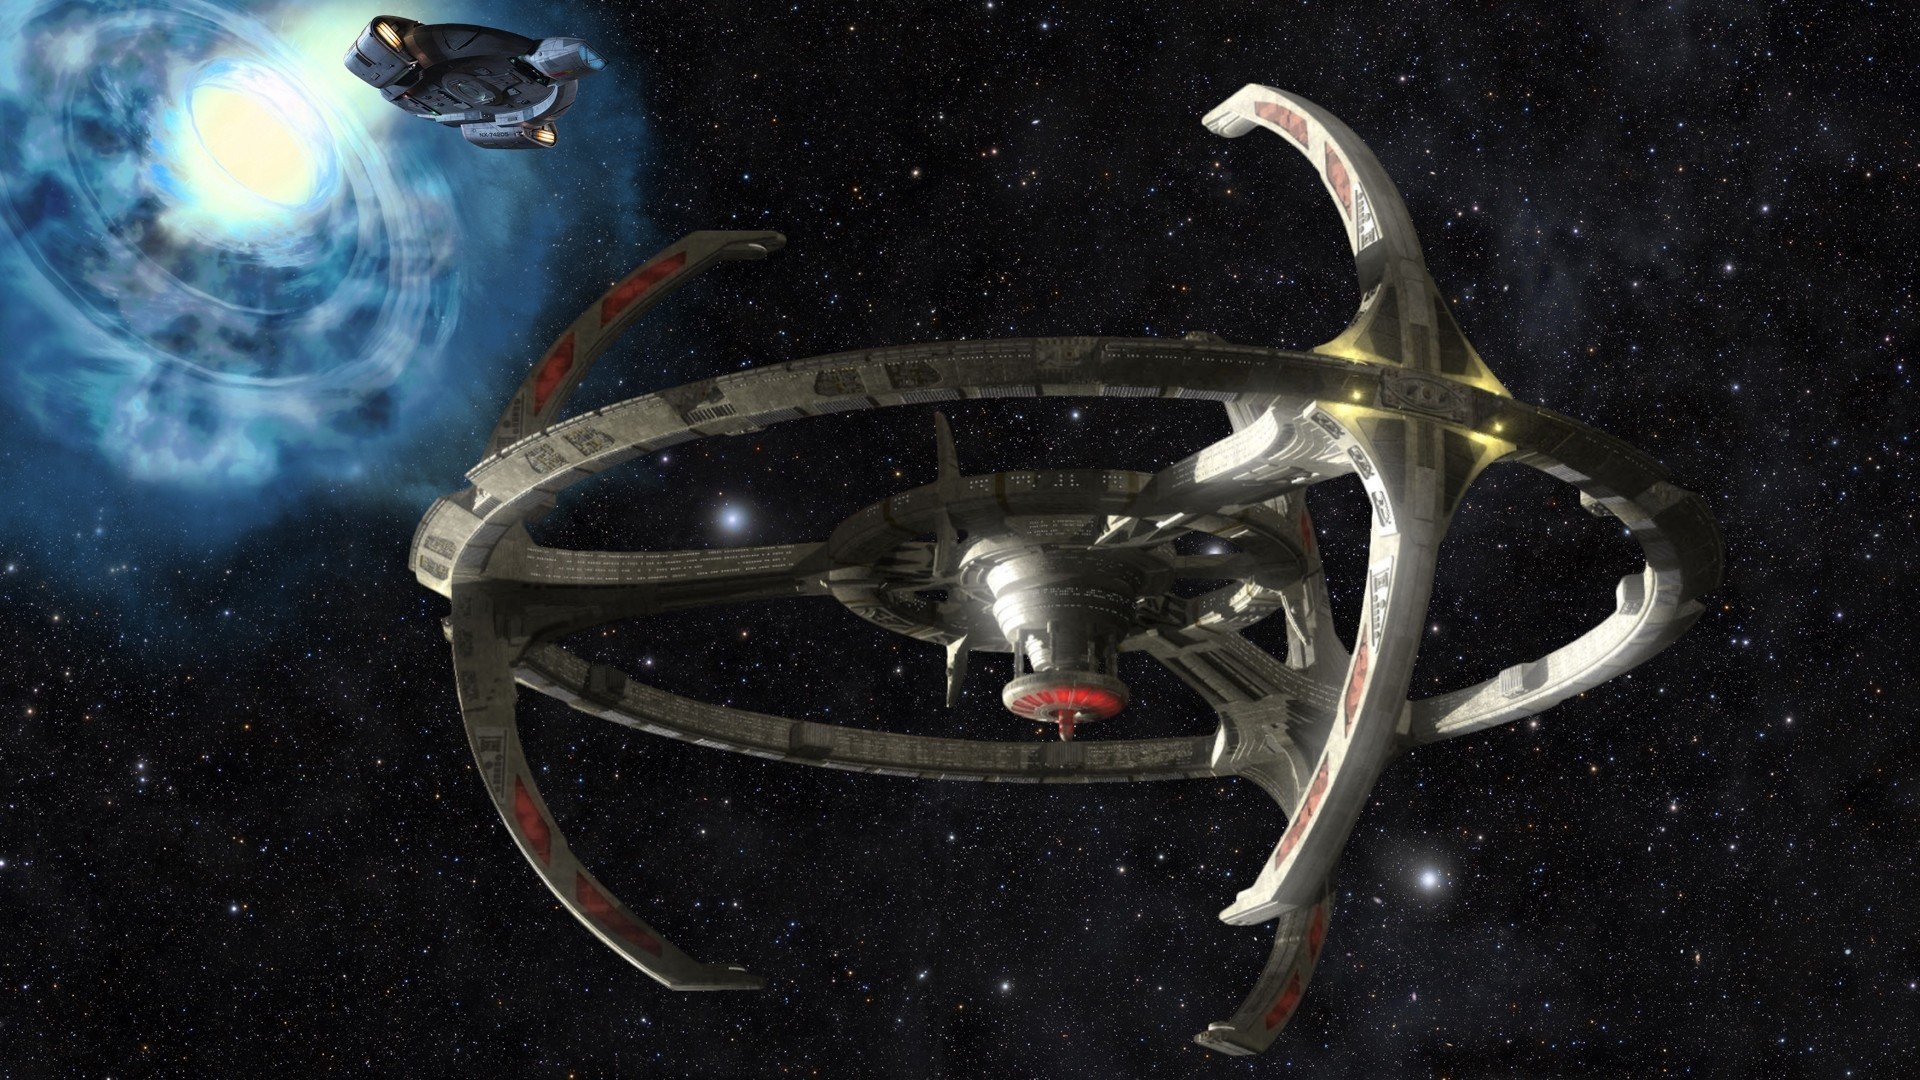 Download full hd 1920x1080 Star Trek: Deep Space Nine PC background ID:82992 for free